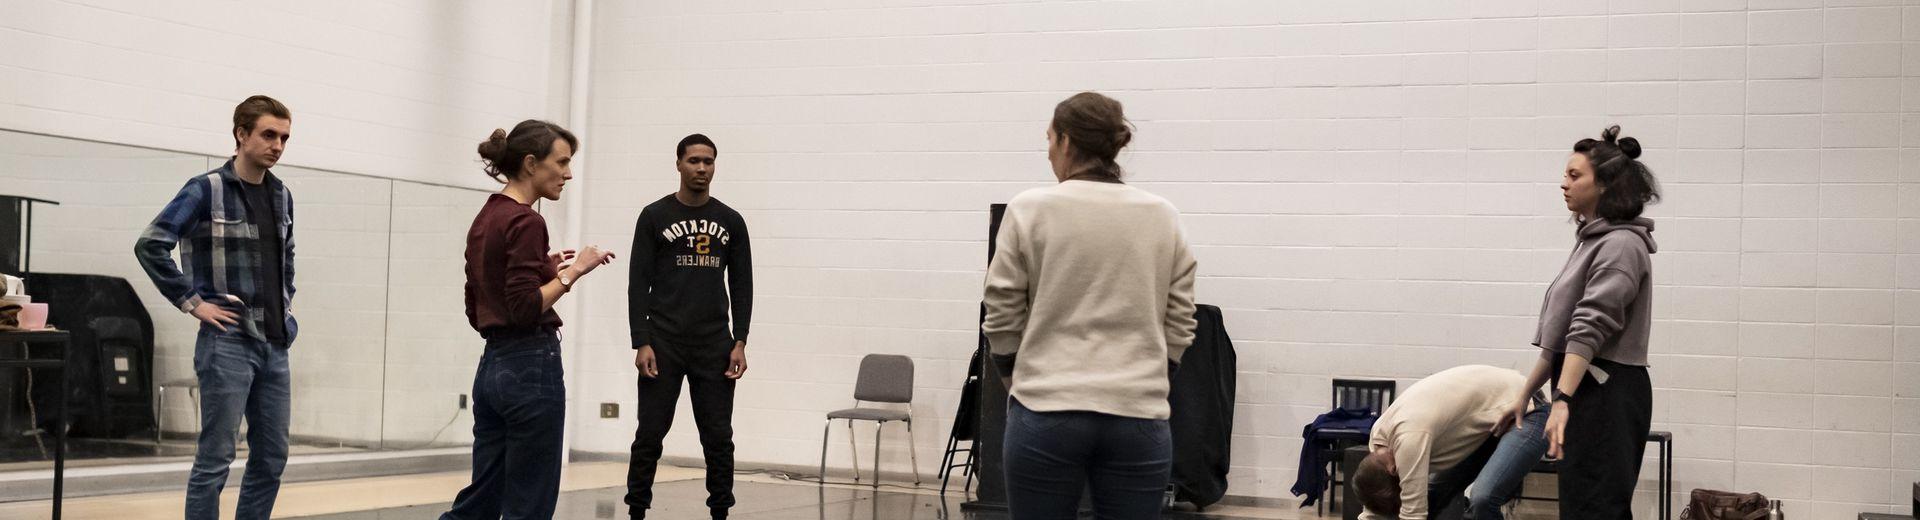 A group of students discuss a scene from the play, "Somewhere."